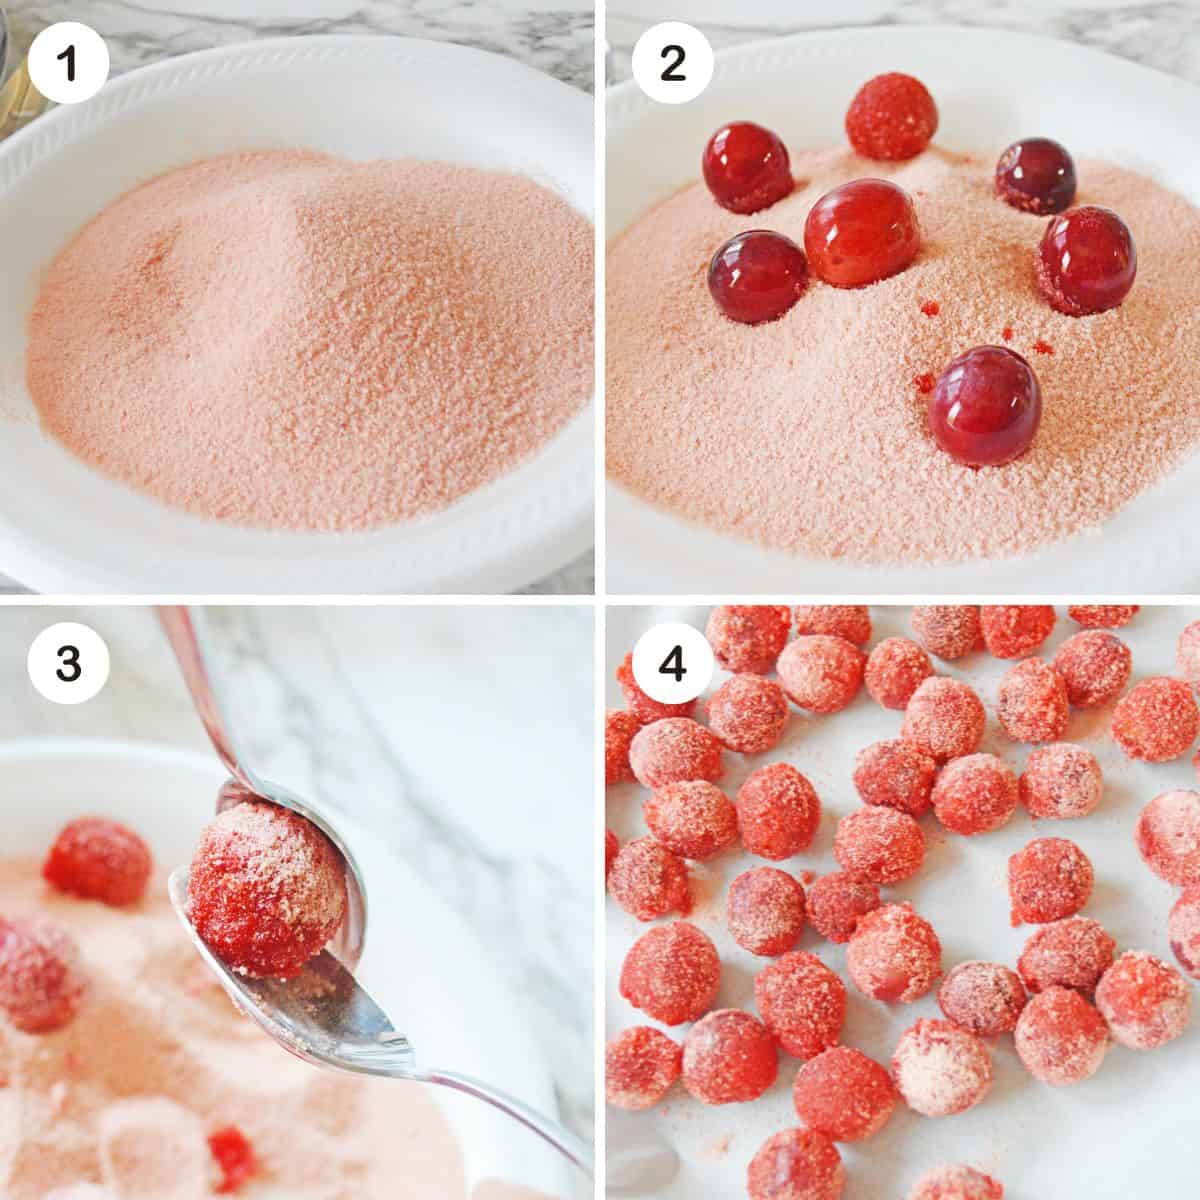 Four image collage of red jello powder in a bowl, grapes in jello powder, grape being lifted by 2 spoons from the jello, and coated grapes on lined baking sheet.